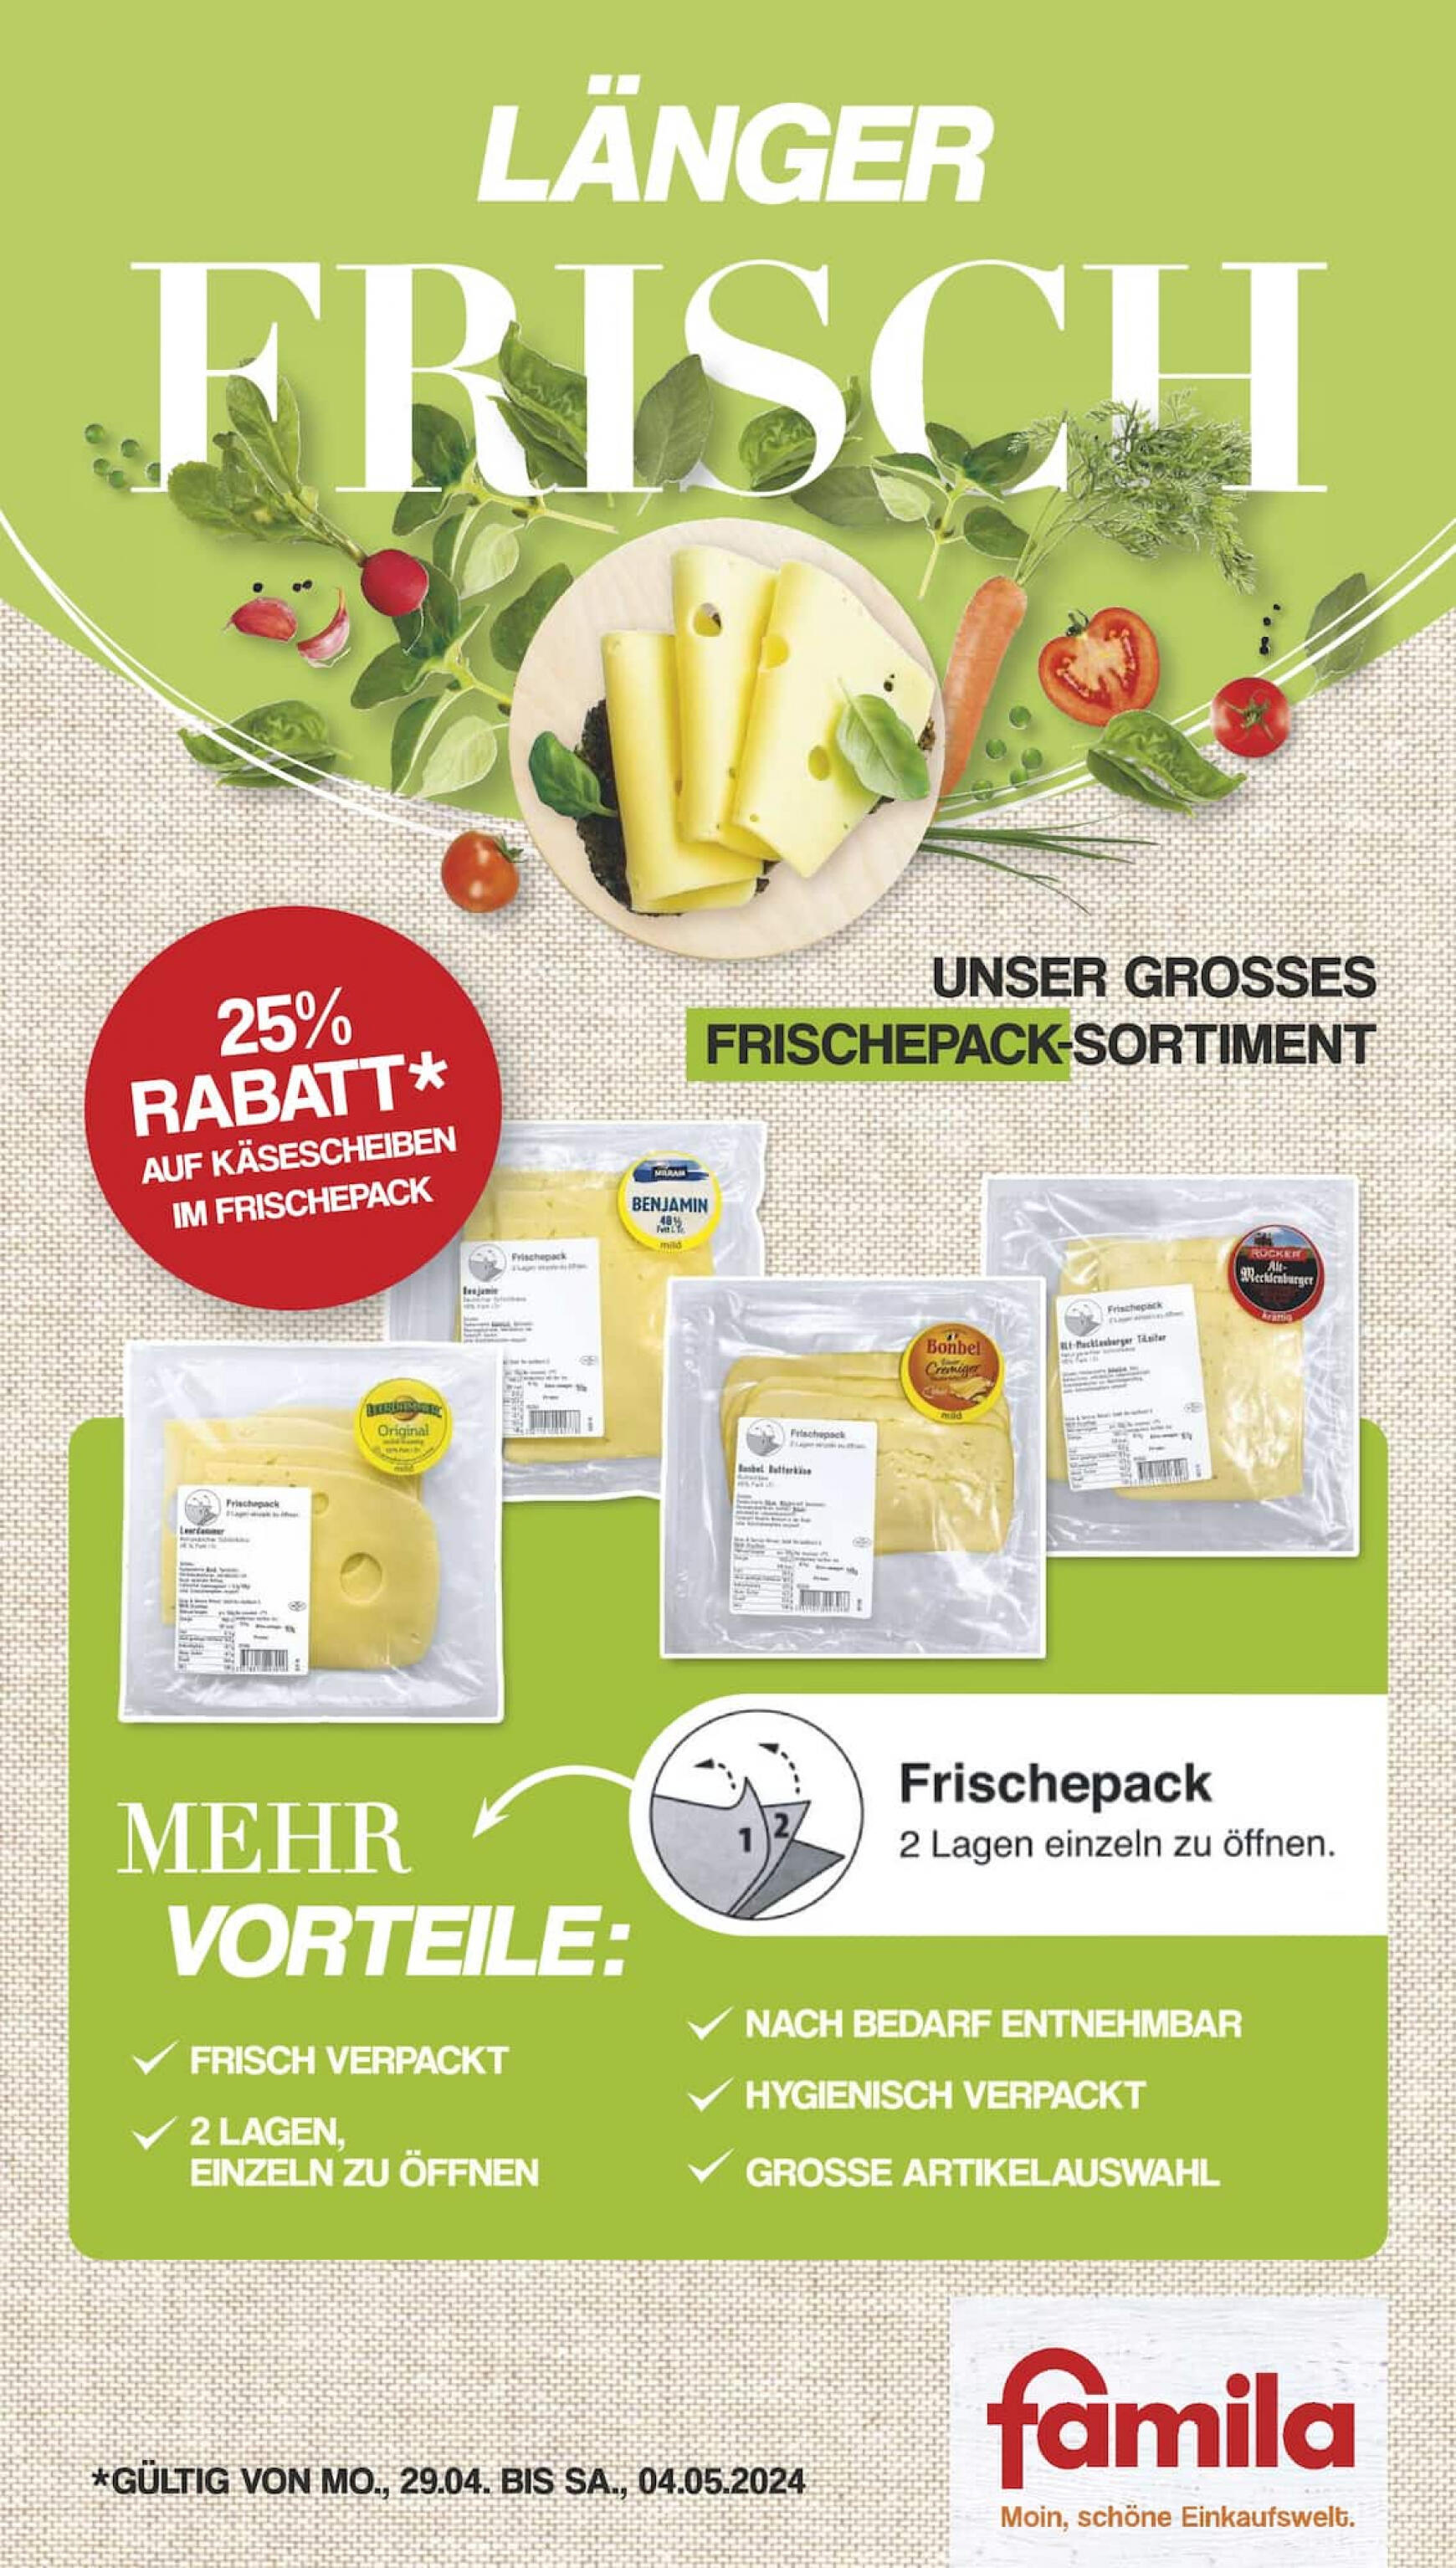 famila-nordwest - Flyer Famila Nordwest aktuell 29.04. - 04.05. - page: 10